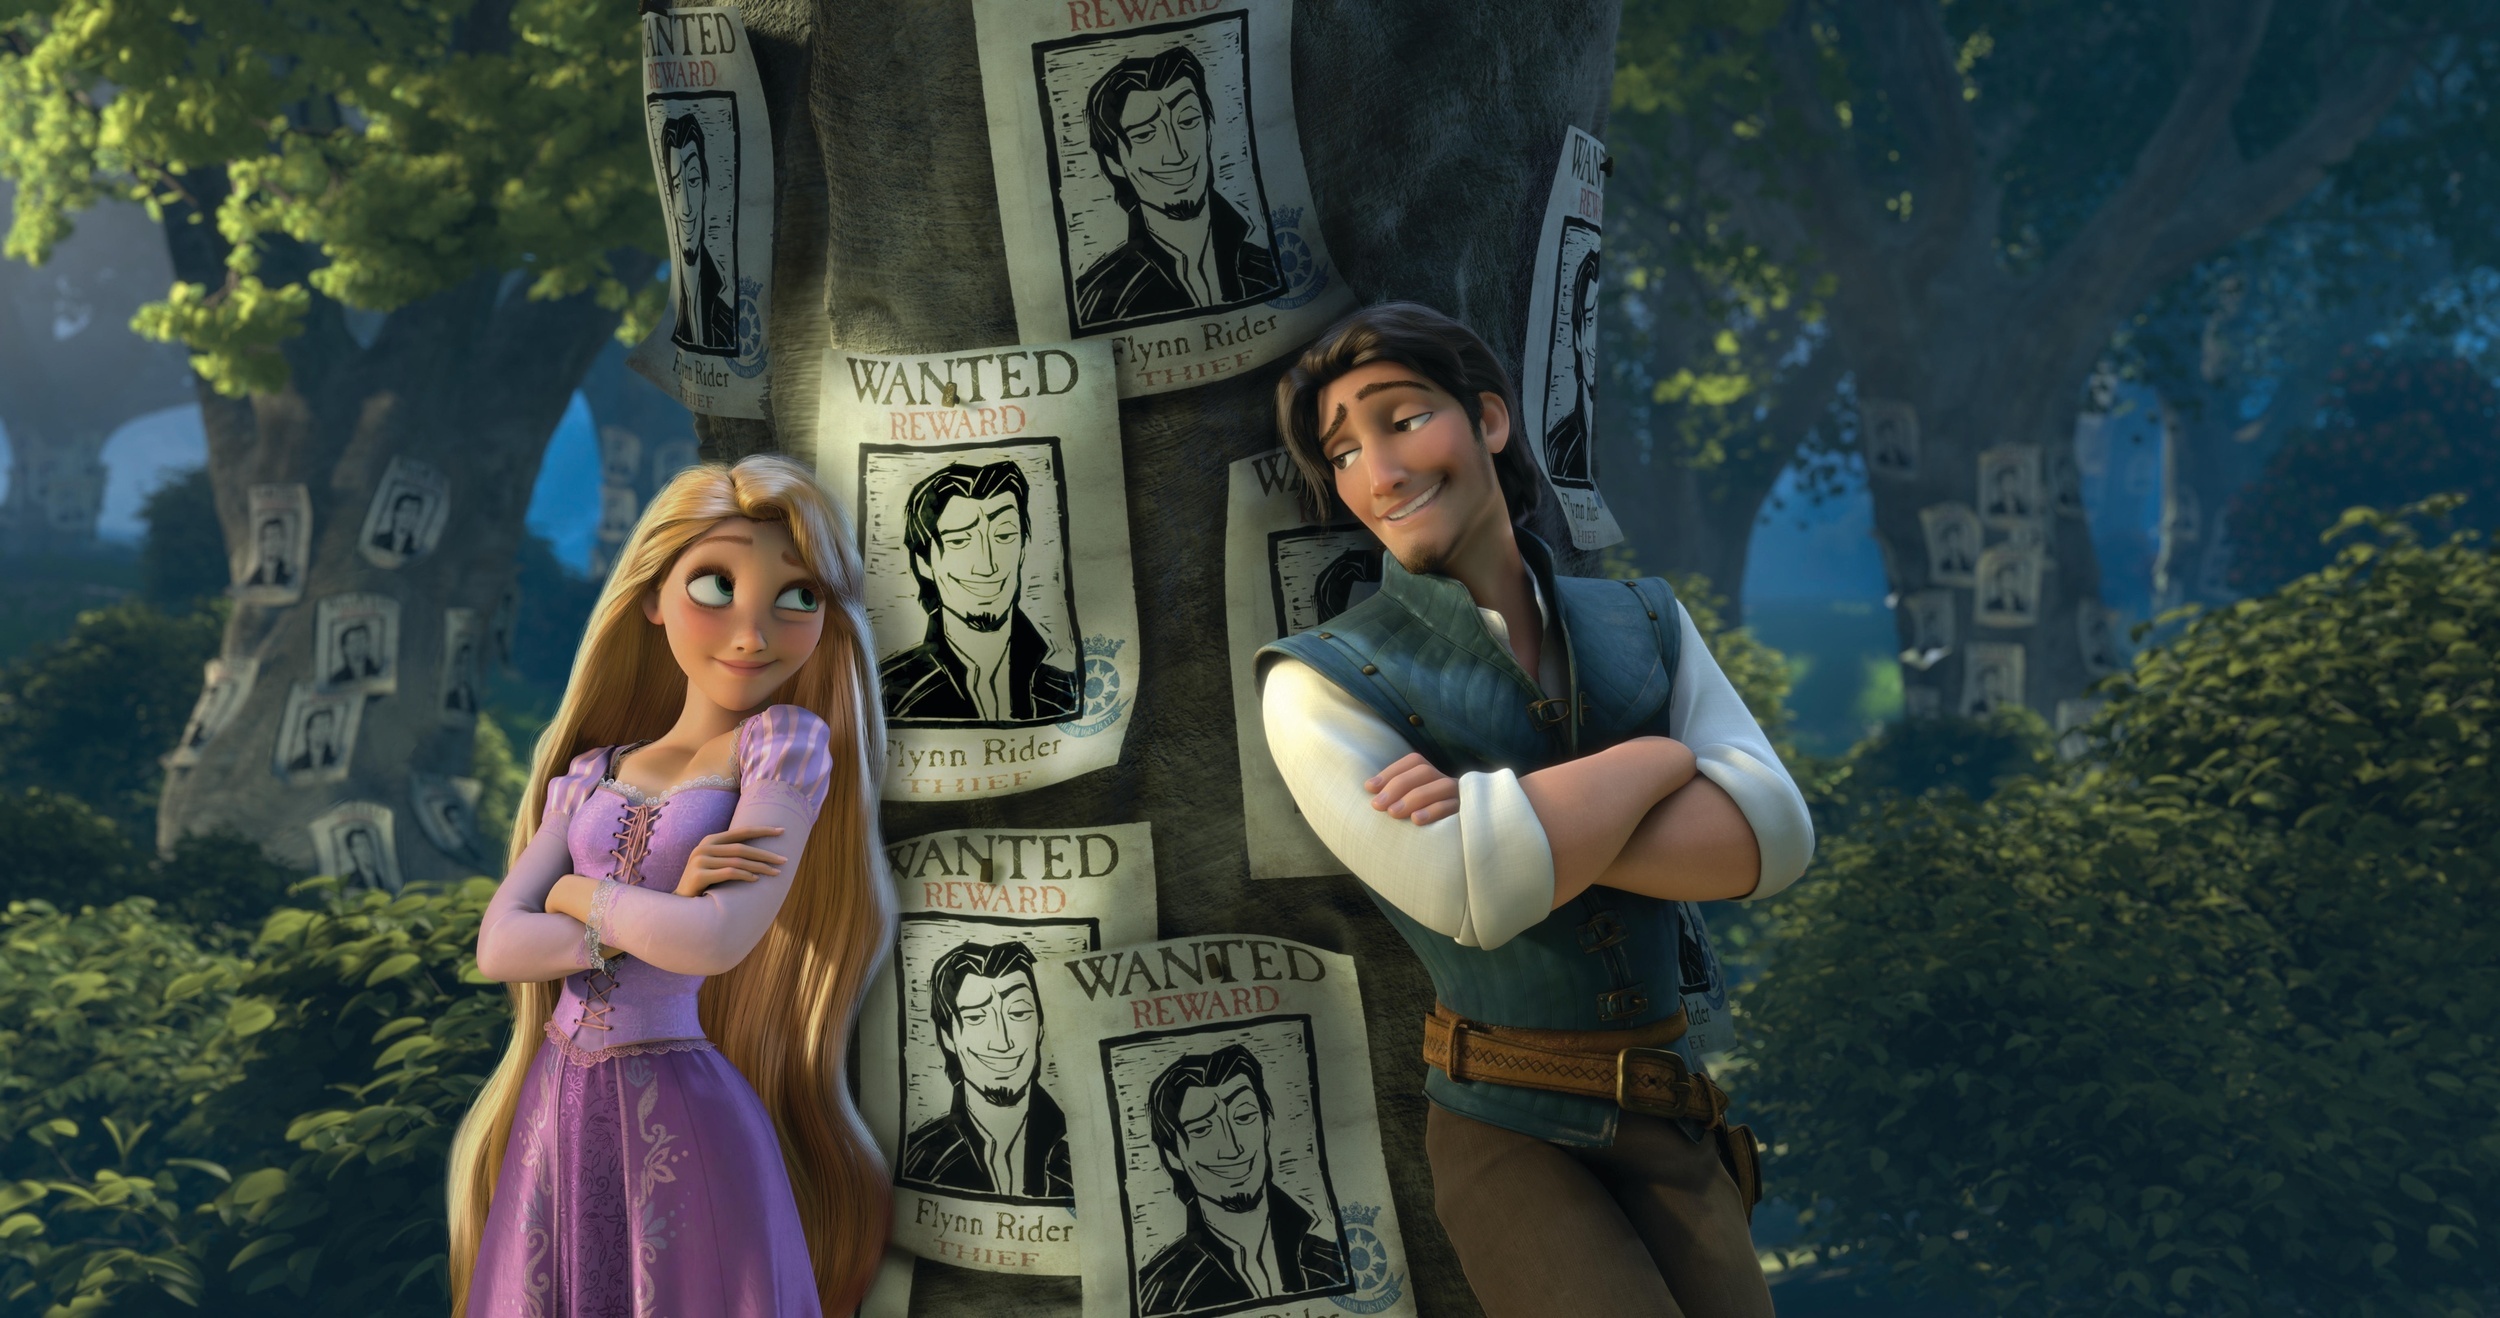 <p>Disney’s <em>Tangled</em> was a fraught production, leading to worries it would end up a disaster and a box-office fiasco. It ended up being a big hit that spawned multiple TV shows. The film begins not with Rapunzel but with Flynn Rider giving a voiceover that starts with, “This is the story of how I died.” He follows that with, “Don’t worry, this is actually a very fun story,” but that still grabs you.</p><p>You may also like: <a href='https://www.yardbarker.com/entertainment/articles/the_25_best_multiple_guitar_bands_101923/s1__35133437'>The 25 best multiple-guitar bands</a></p>